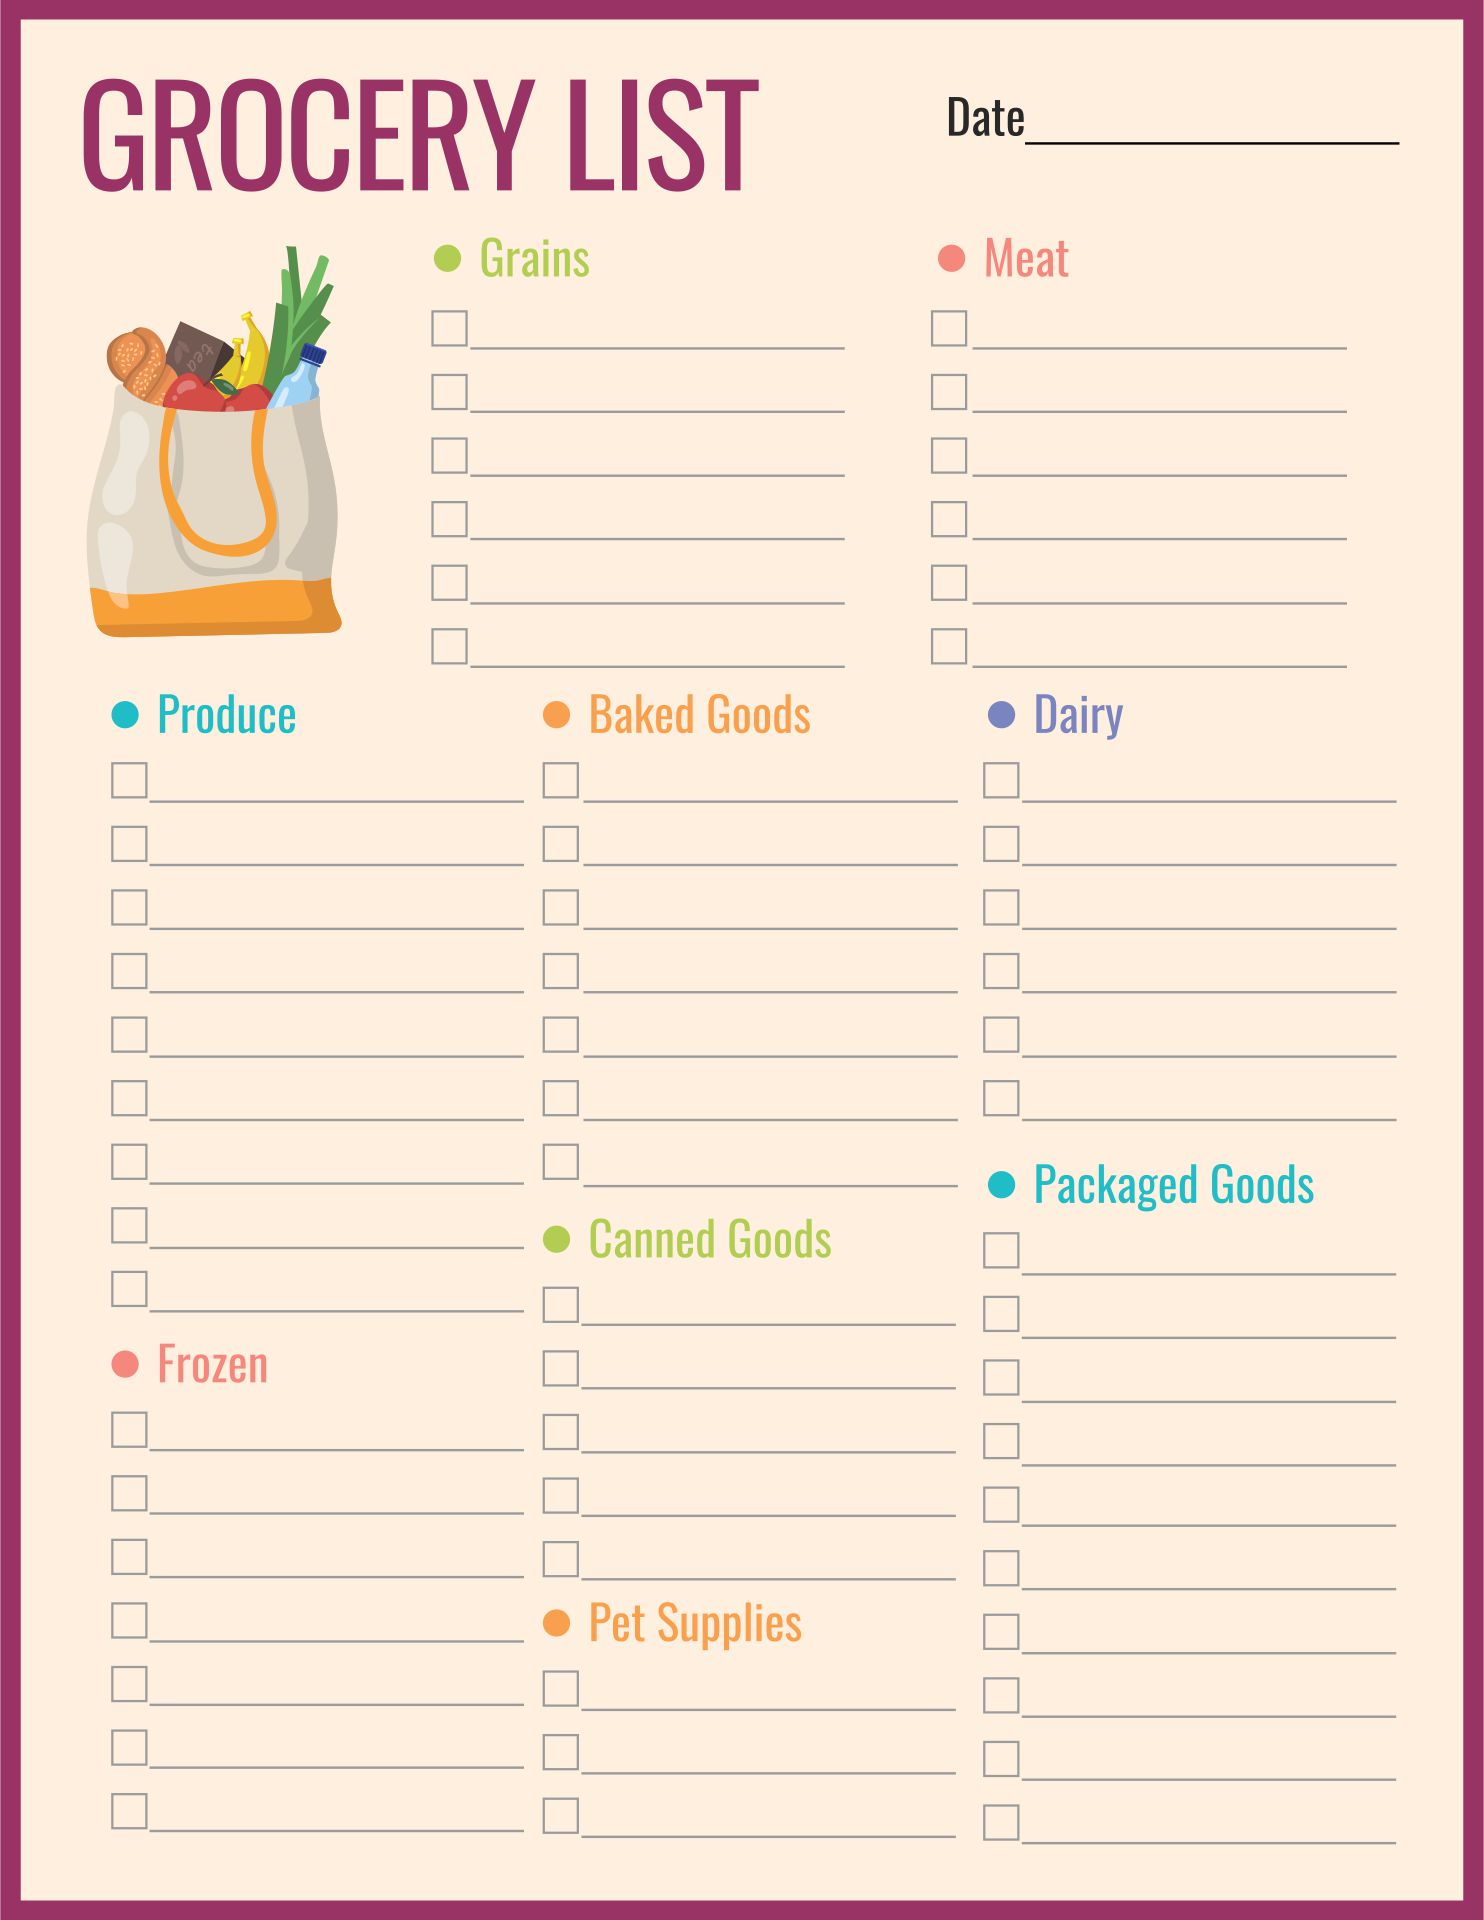 7 Best Images of Editable Blank Printable Checklists - Free Printable